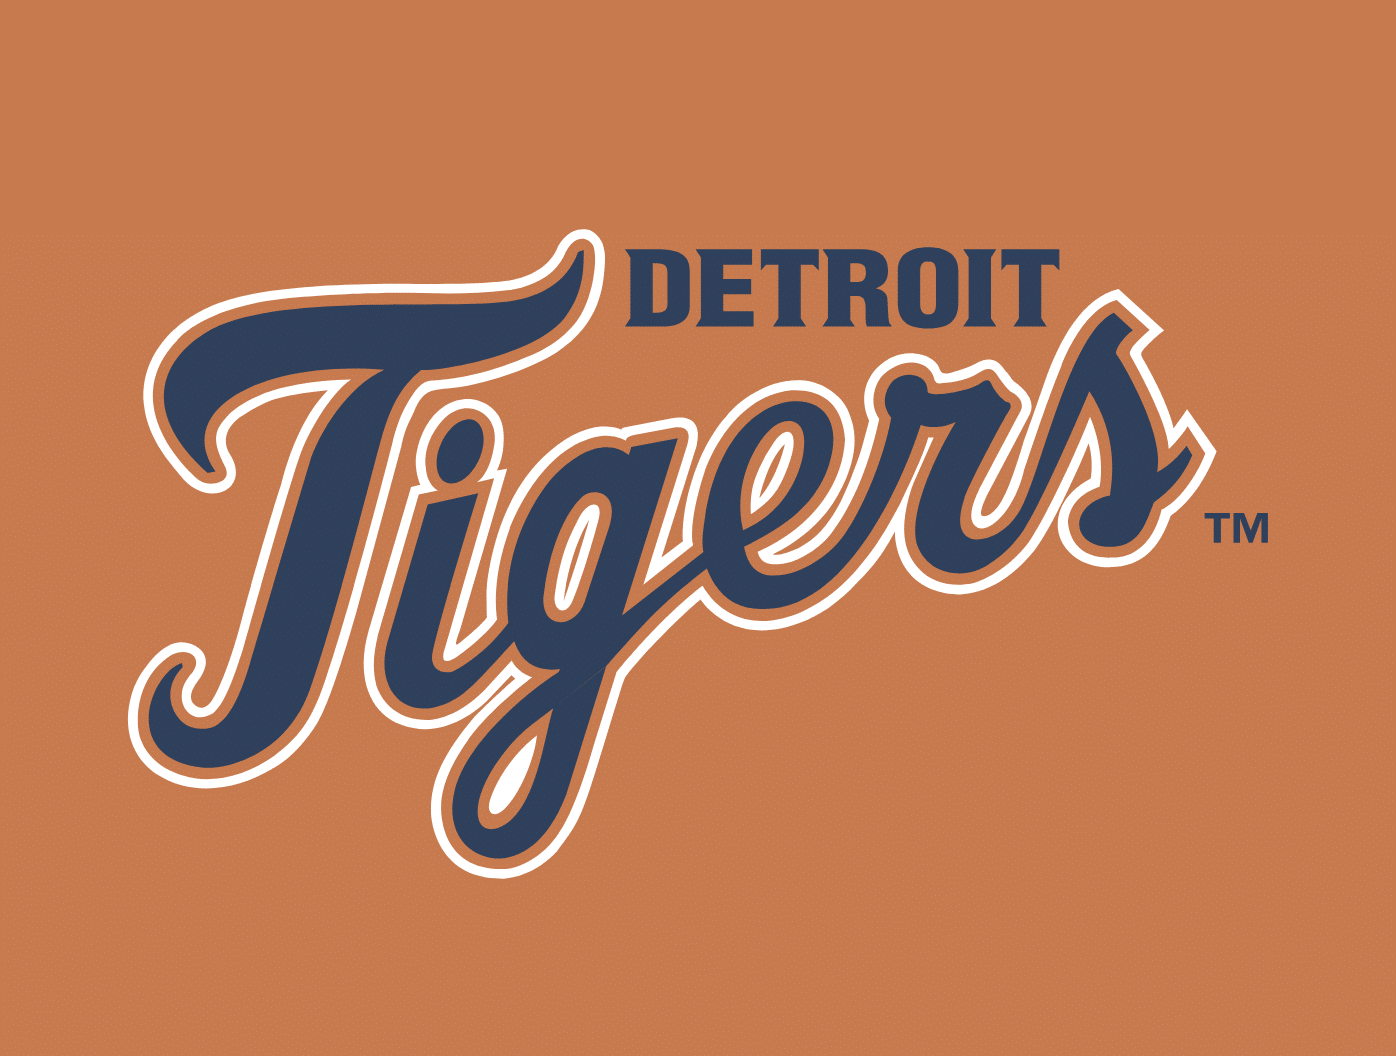 Detroit Tigers announce coaching changes Matthew Boyd and Cisnero to become free agents Detroit Tigers announce flurry of roster moves Detroit Tigers interested in signing Kenta Maeda